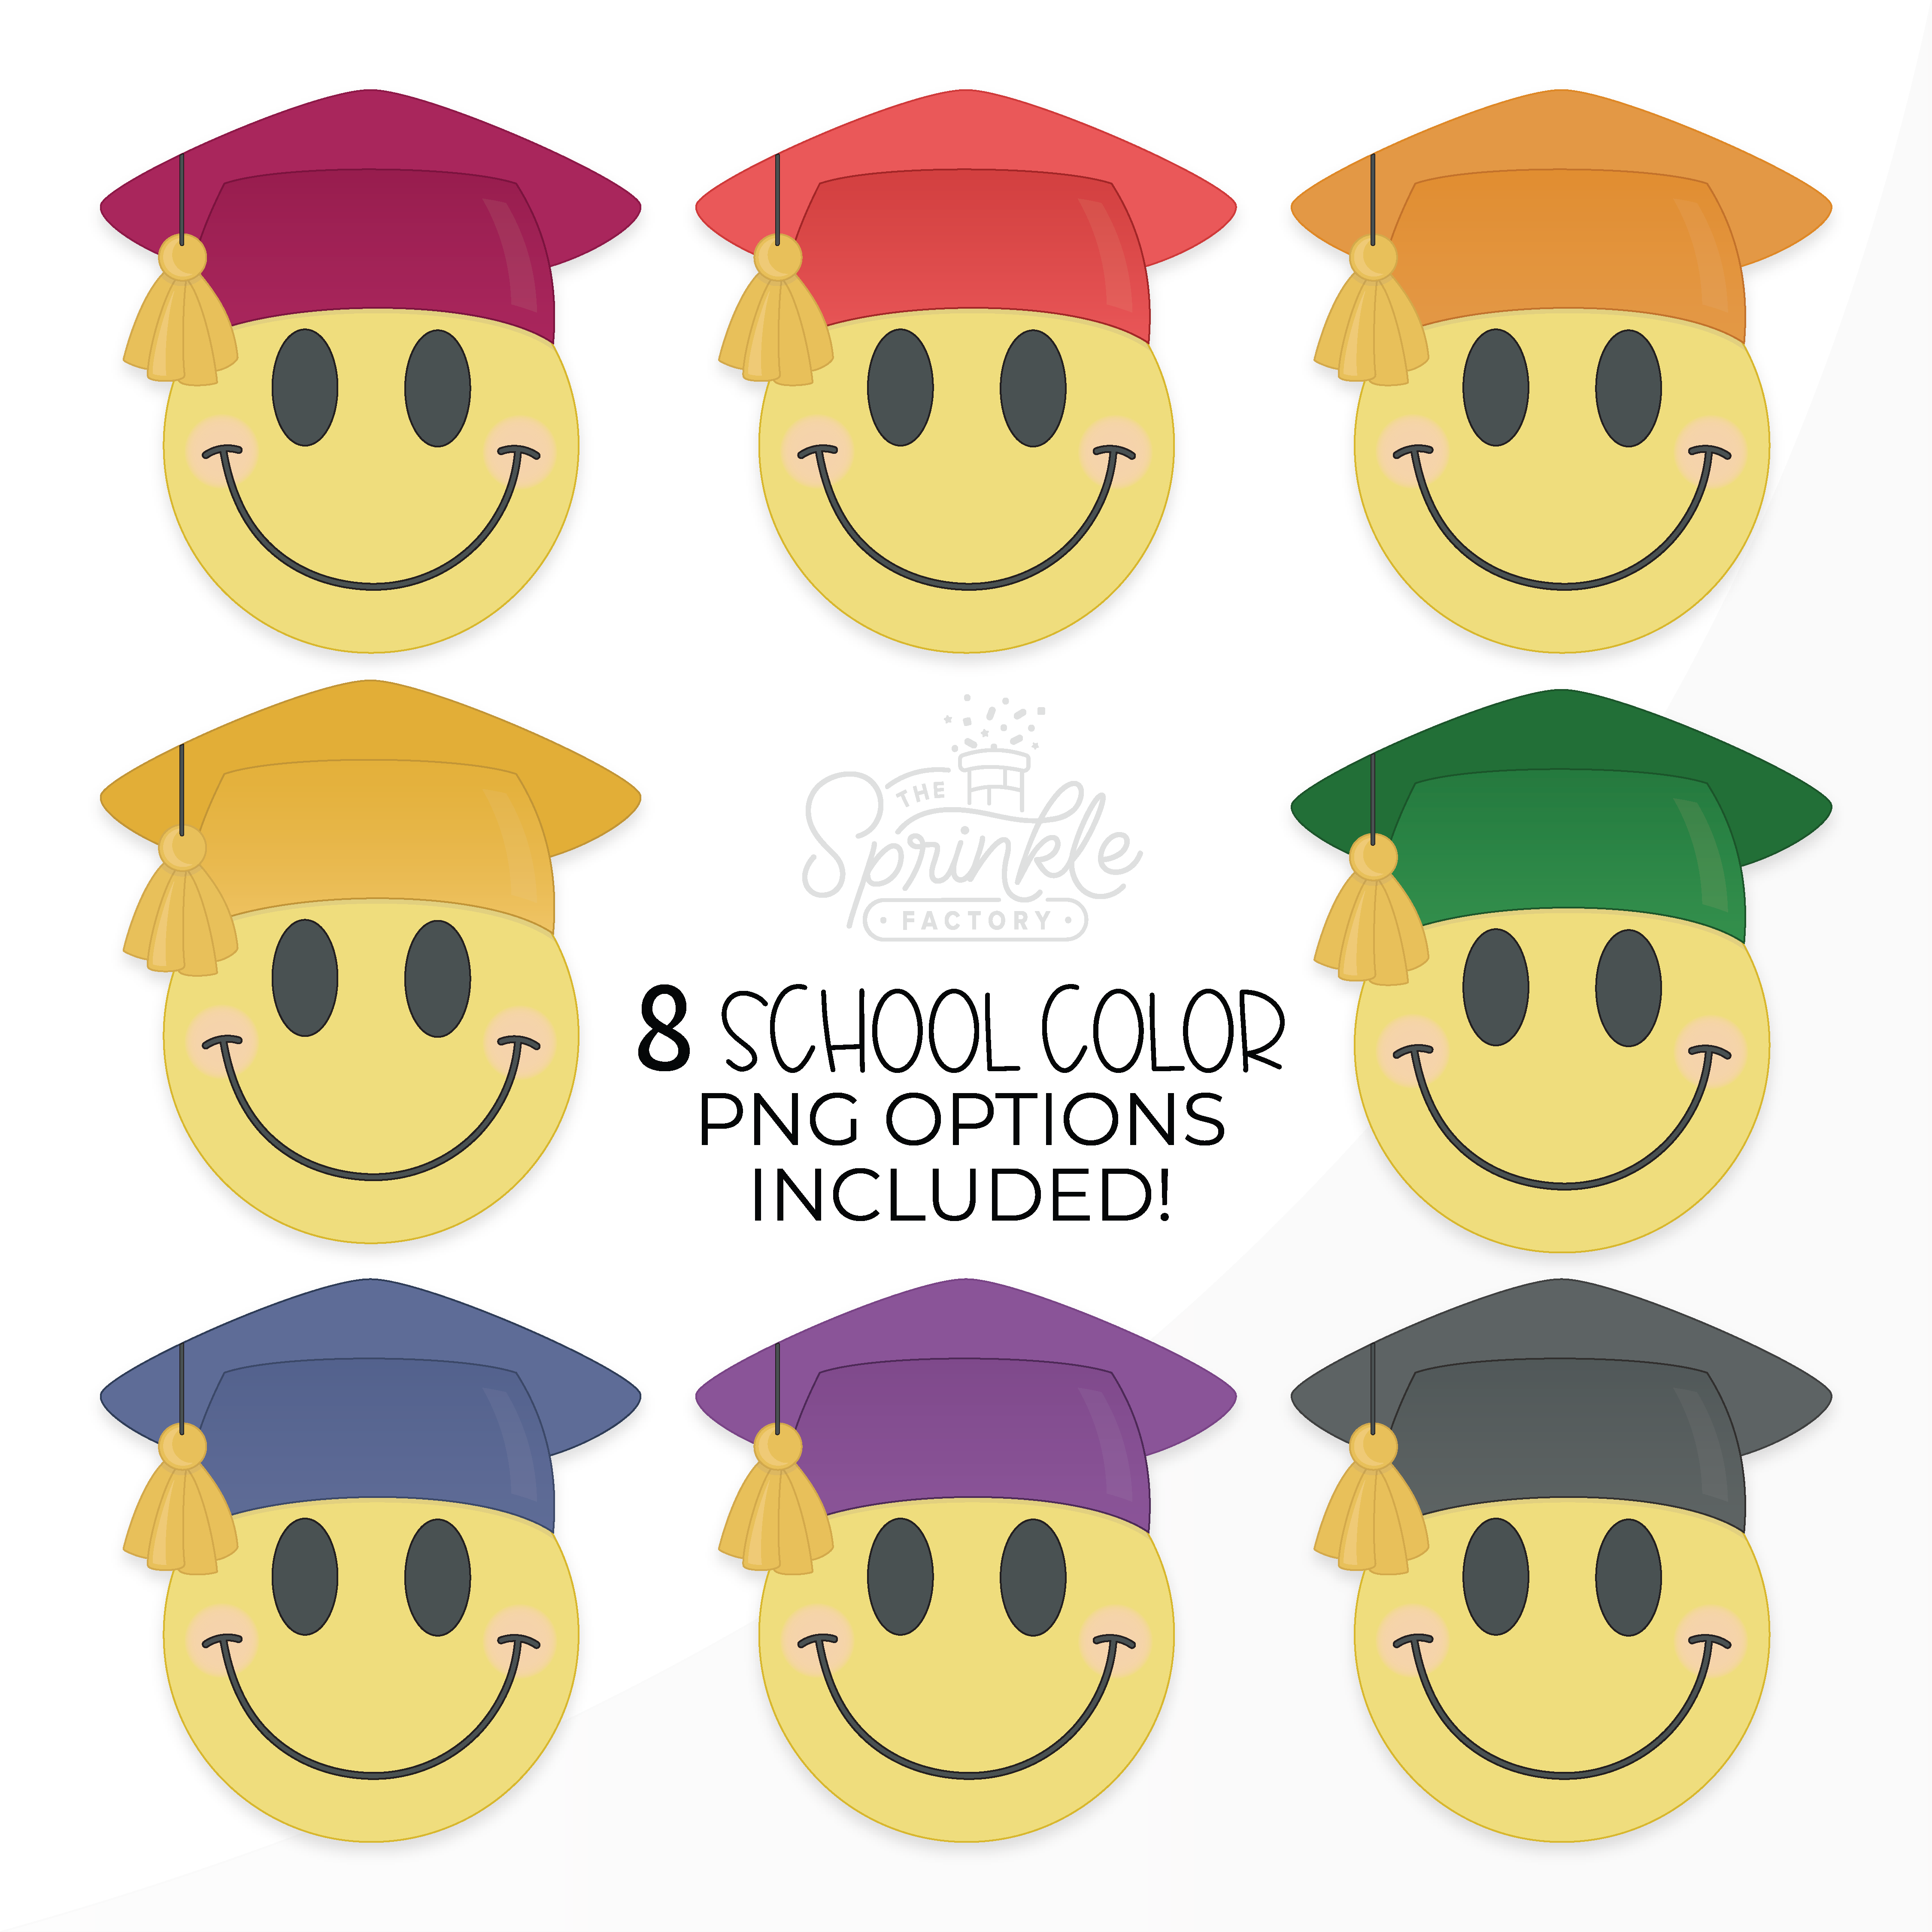 Clipart of smiley grad in all school colours: burgundy, green, red, blue, orange, purple, gold and black.